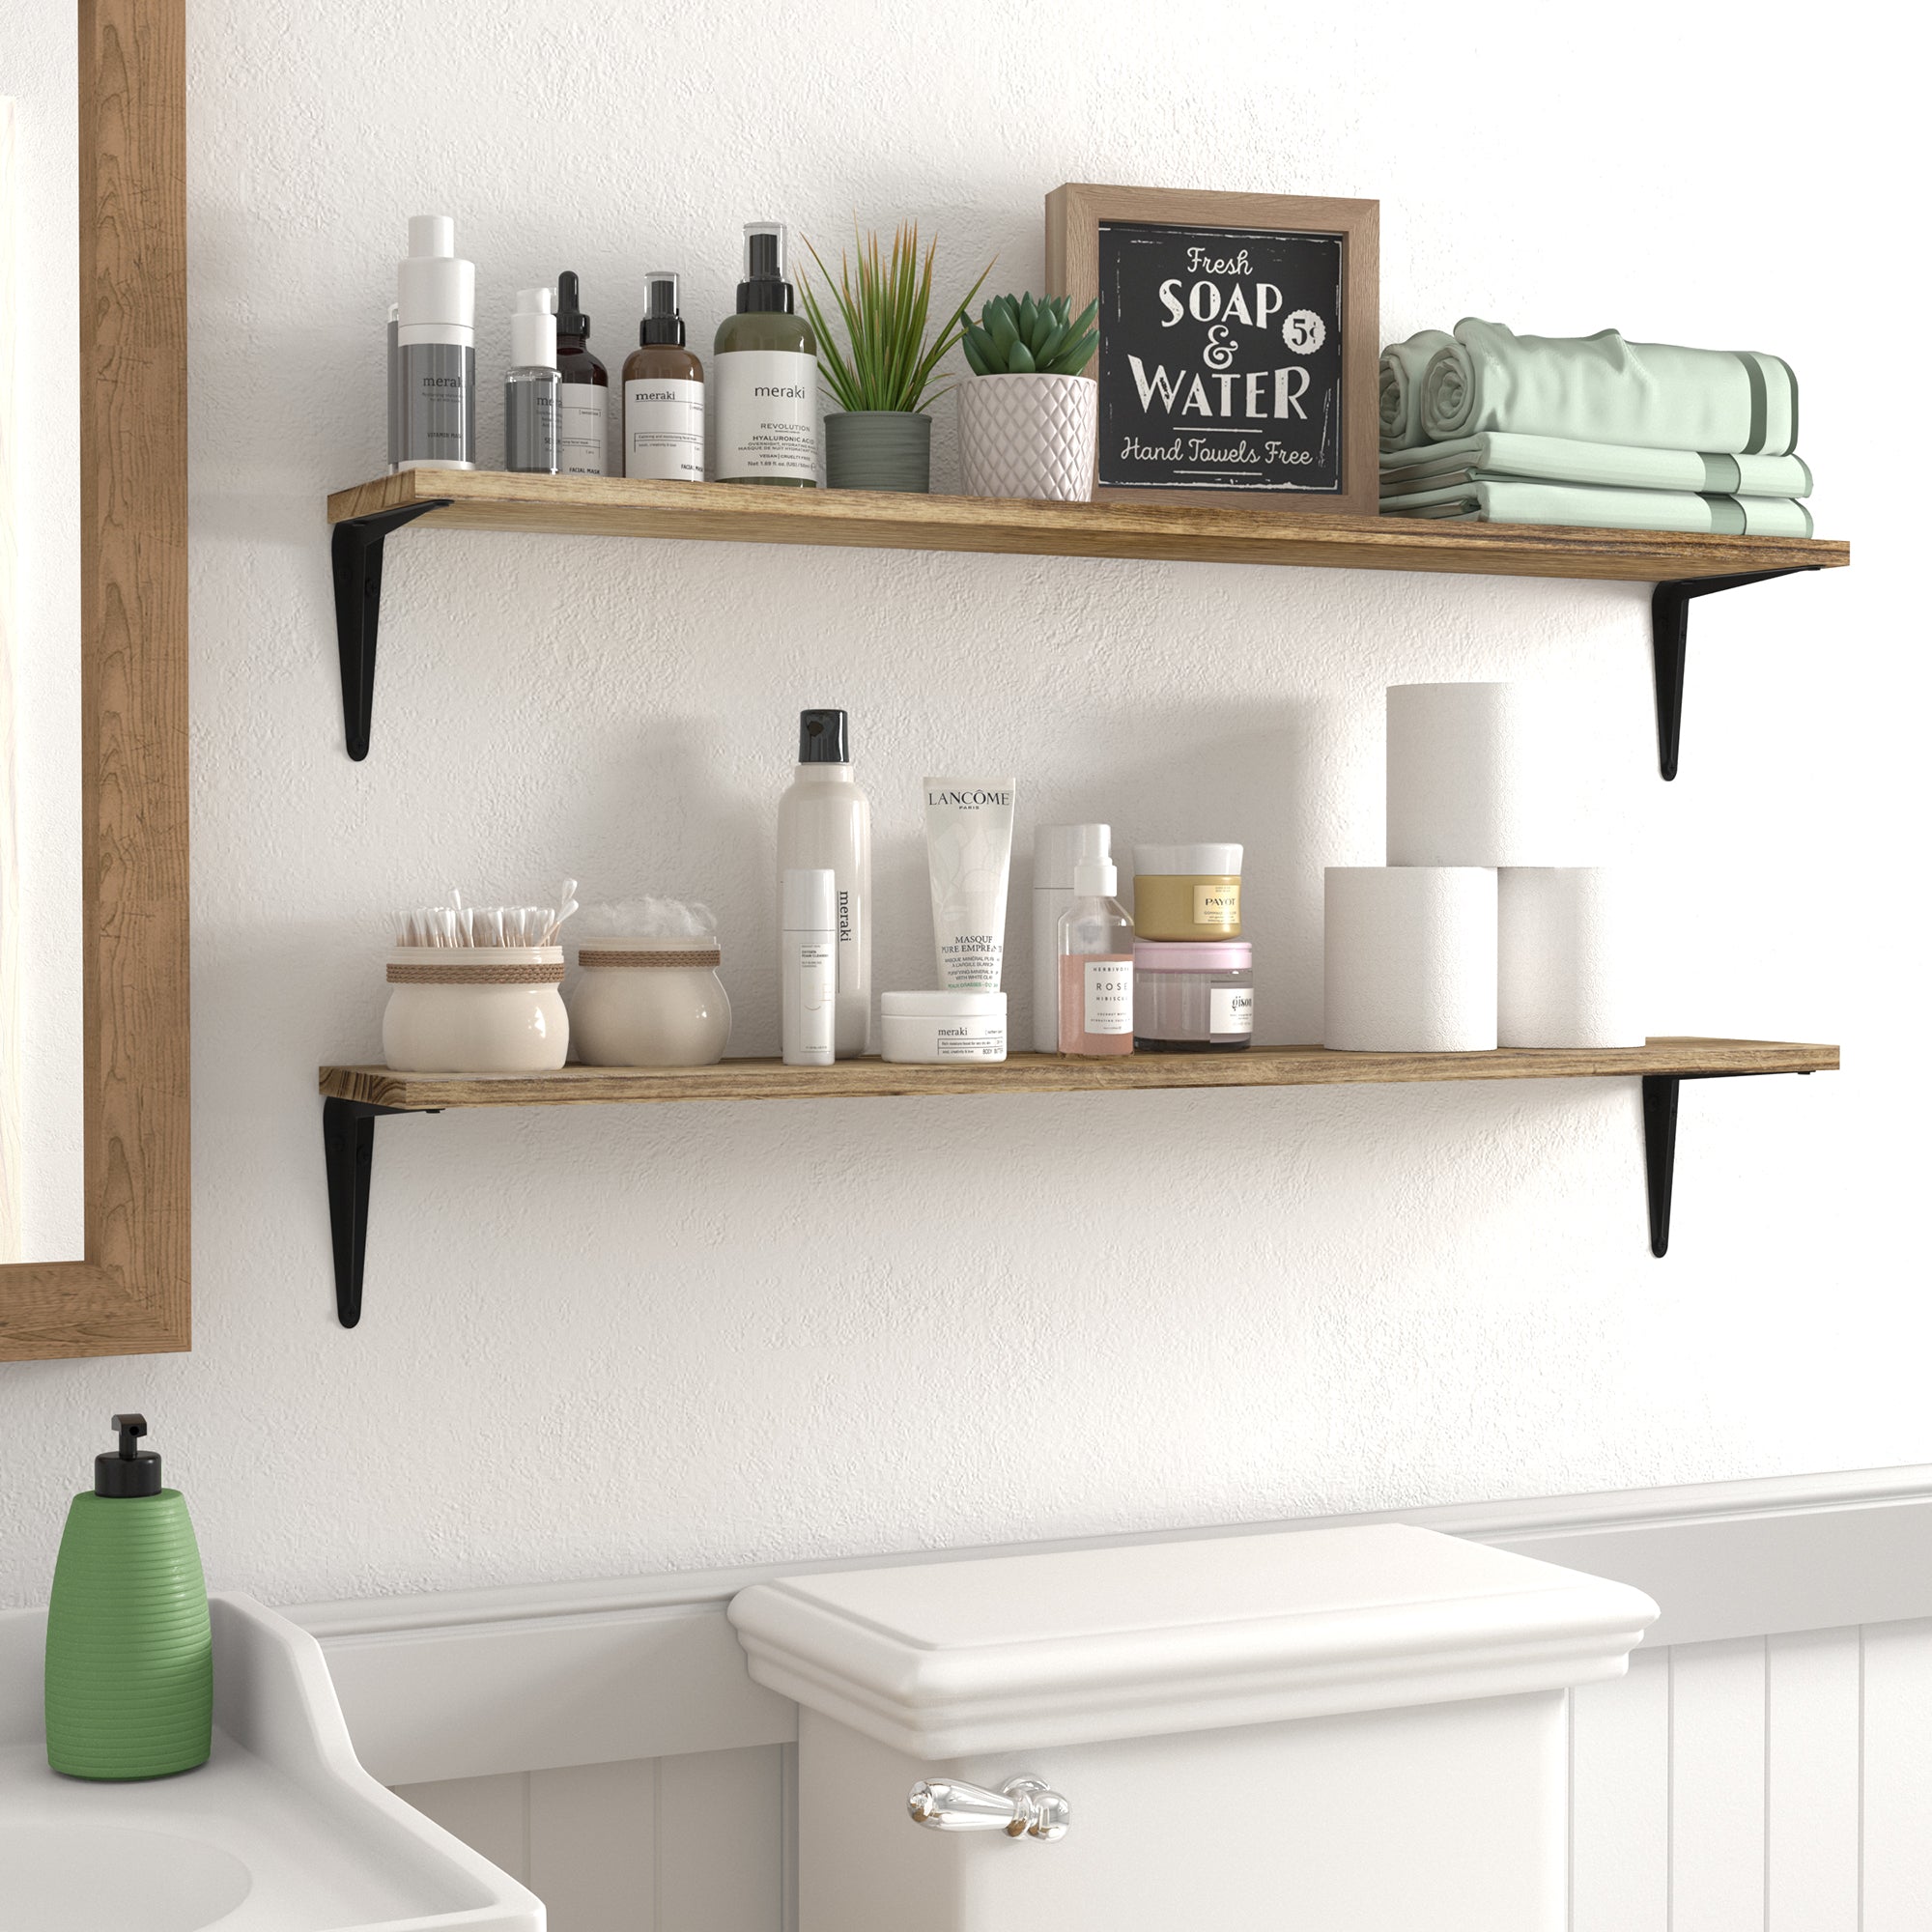 Bathroom setting with two bathroom wall shelves filled with towels, soaps, and bathroom essentials.